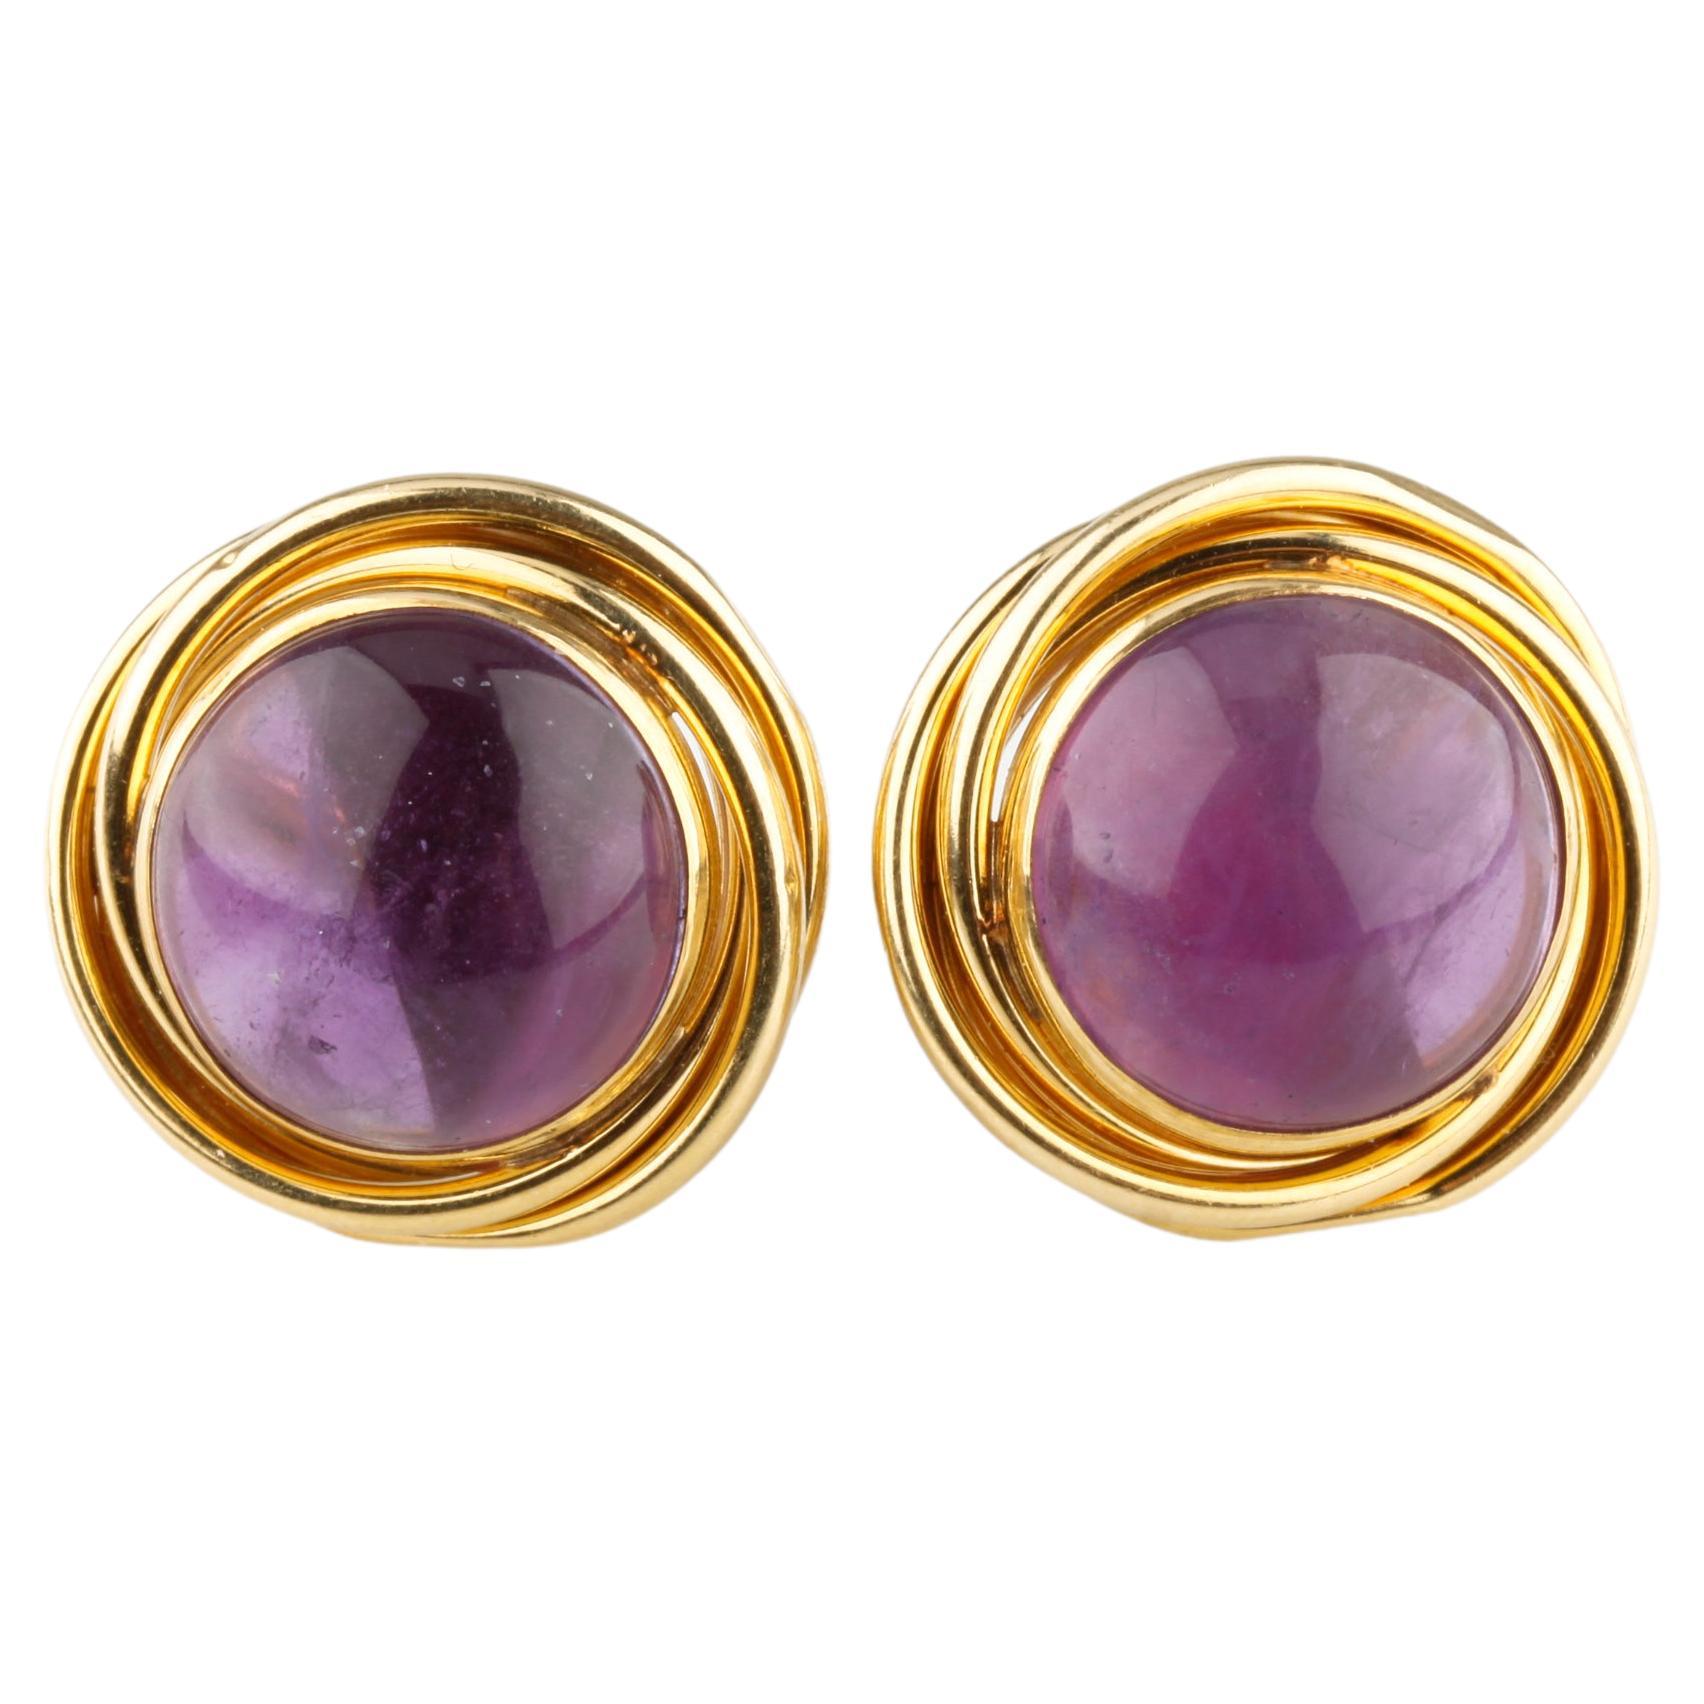 14k Yellow Gold Peter Brams 2 Carat Amethyst Cabochon Clip-On Earrings Gorgeous